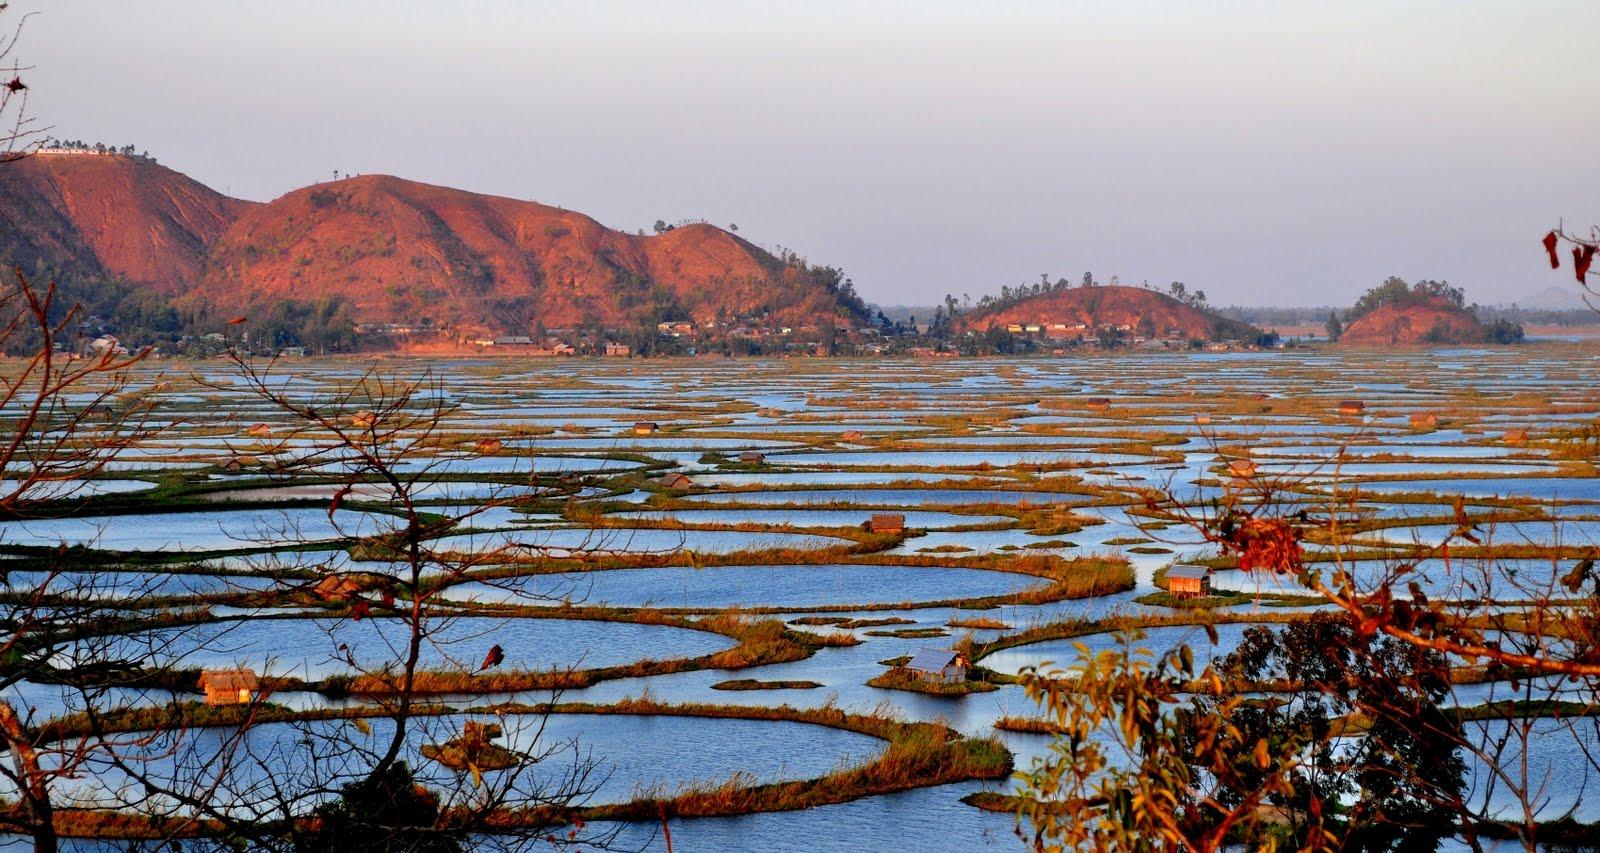 Yatracom  The pristine LOKTAK LAKE is the largest freshwater lake in  NorthEast India that attracts hordes of travellers for its floating  circular swamps which are called phumdis in the local tongue